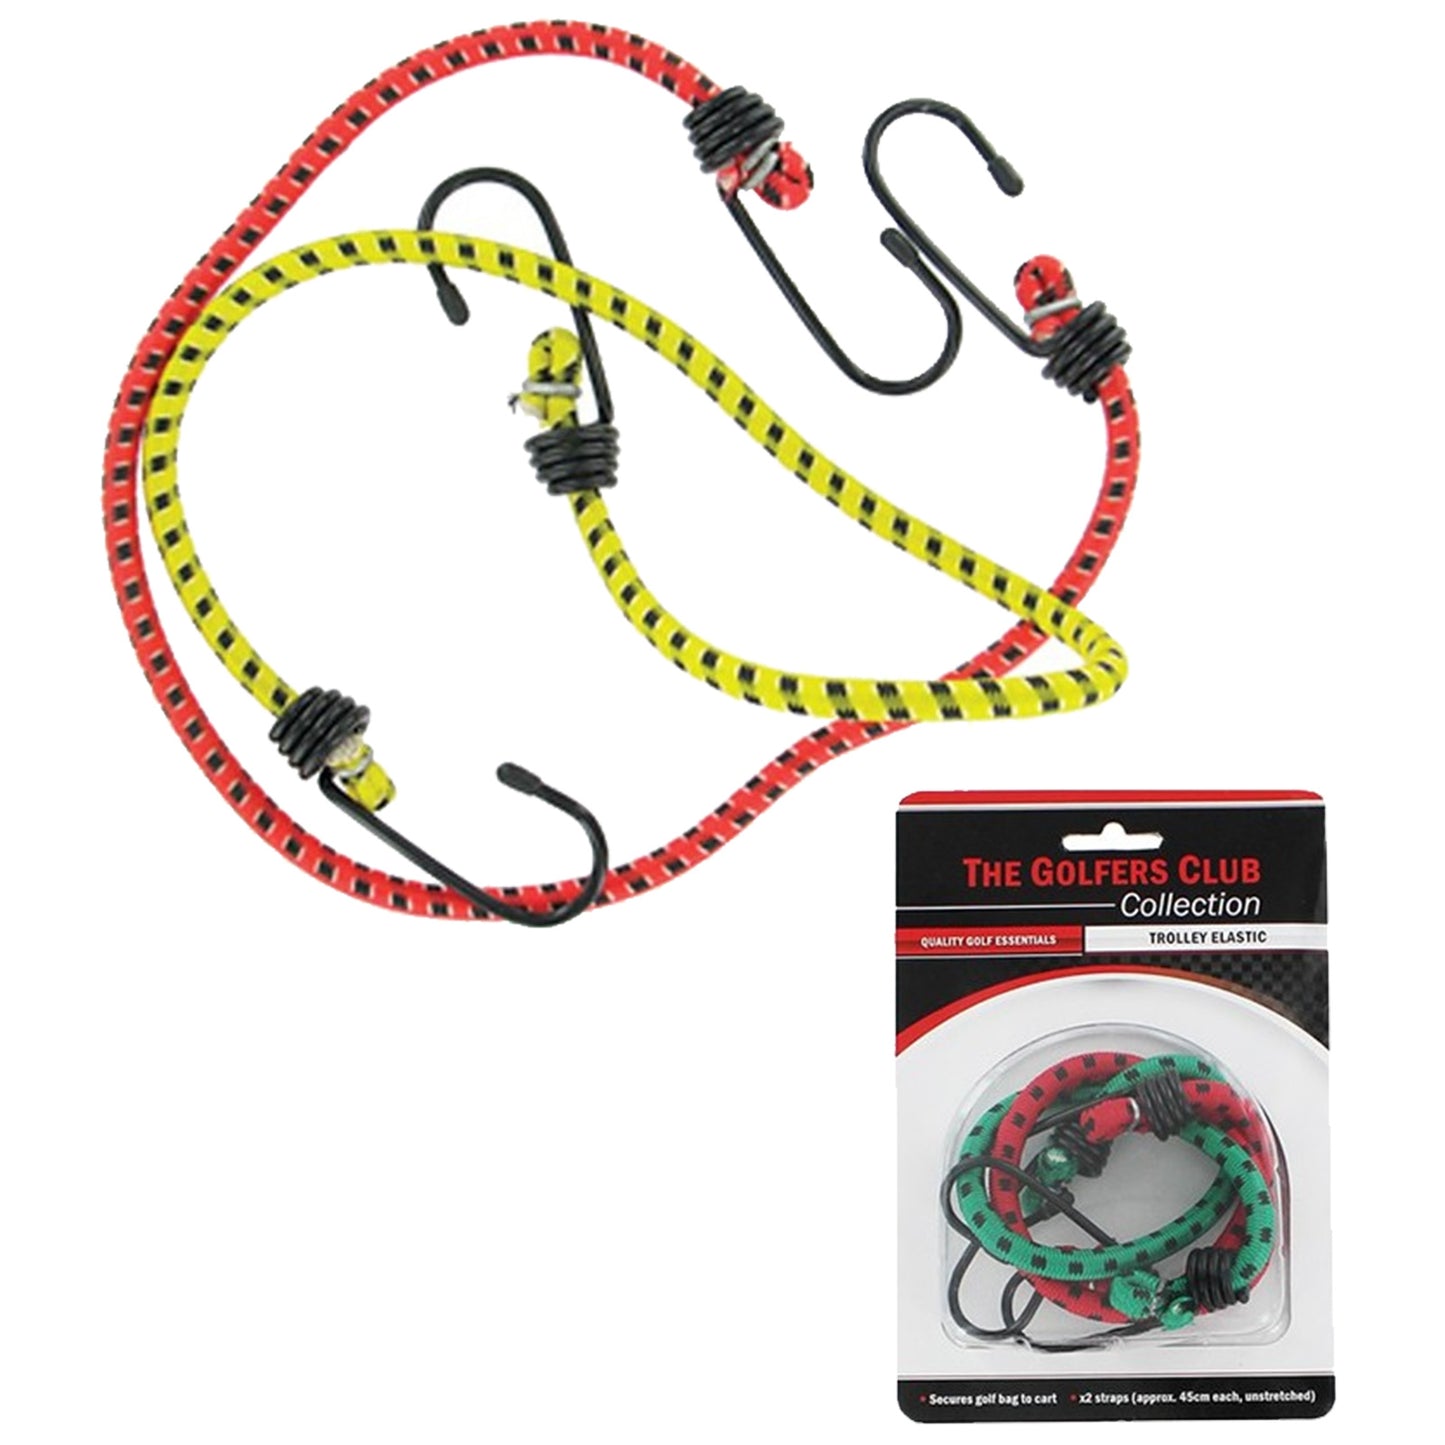 Golfers Club Collection Trolley Elastic Bungee Cord Straps